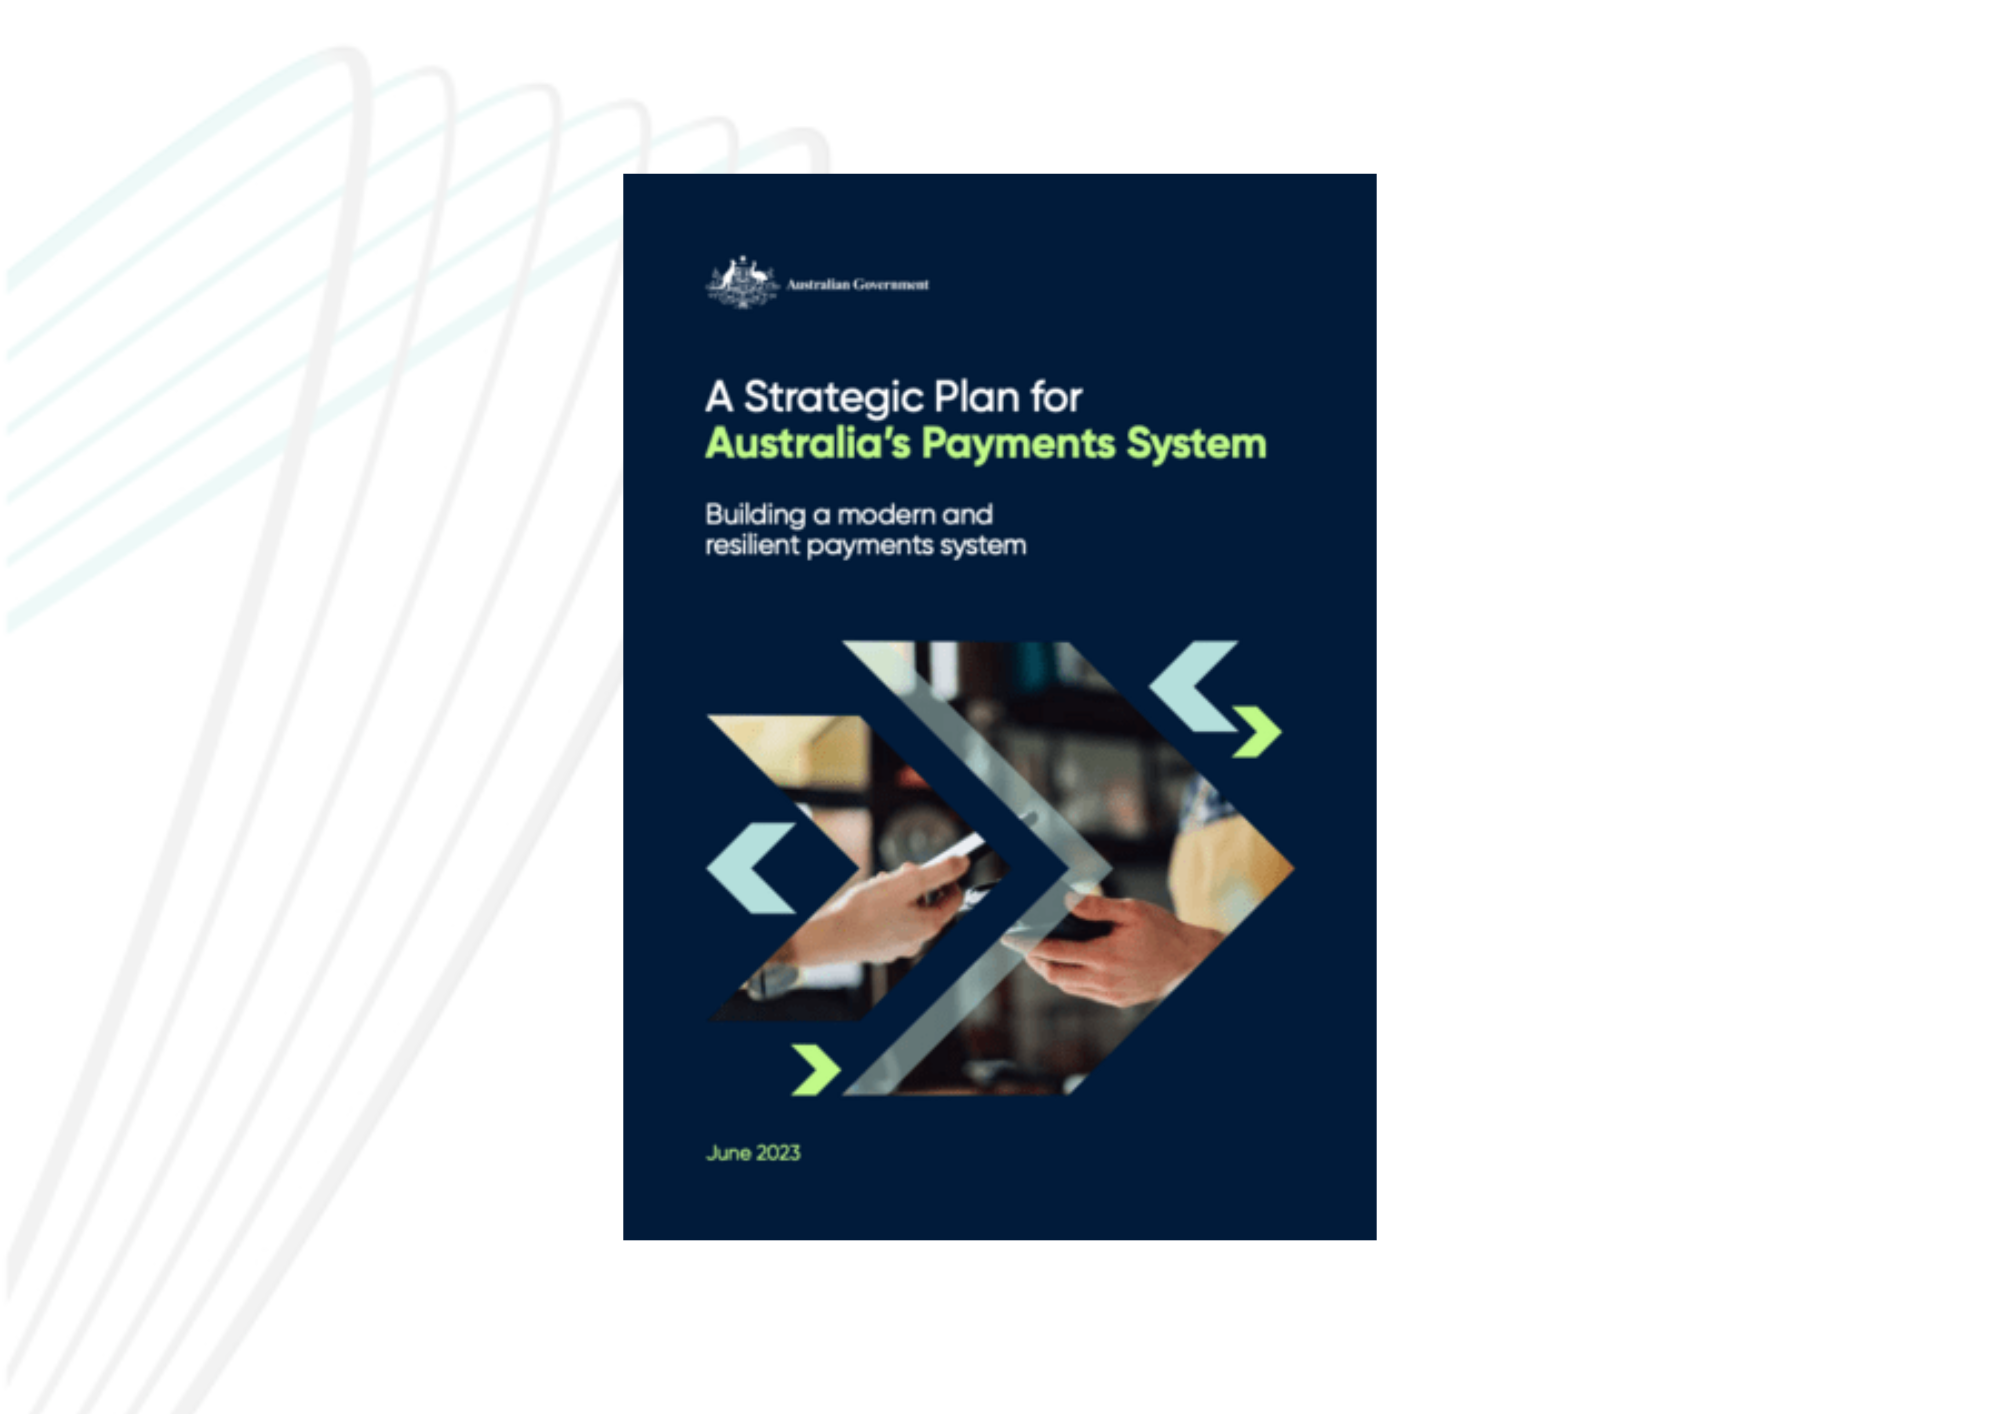 AusPayNet’s Response to Government’s Announcement on Modernising Australia’s Payments System